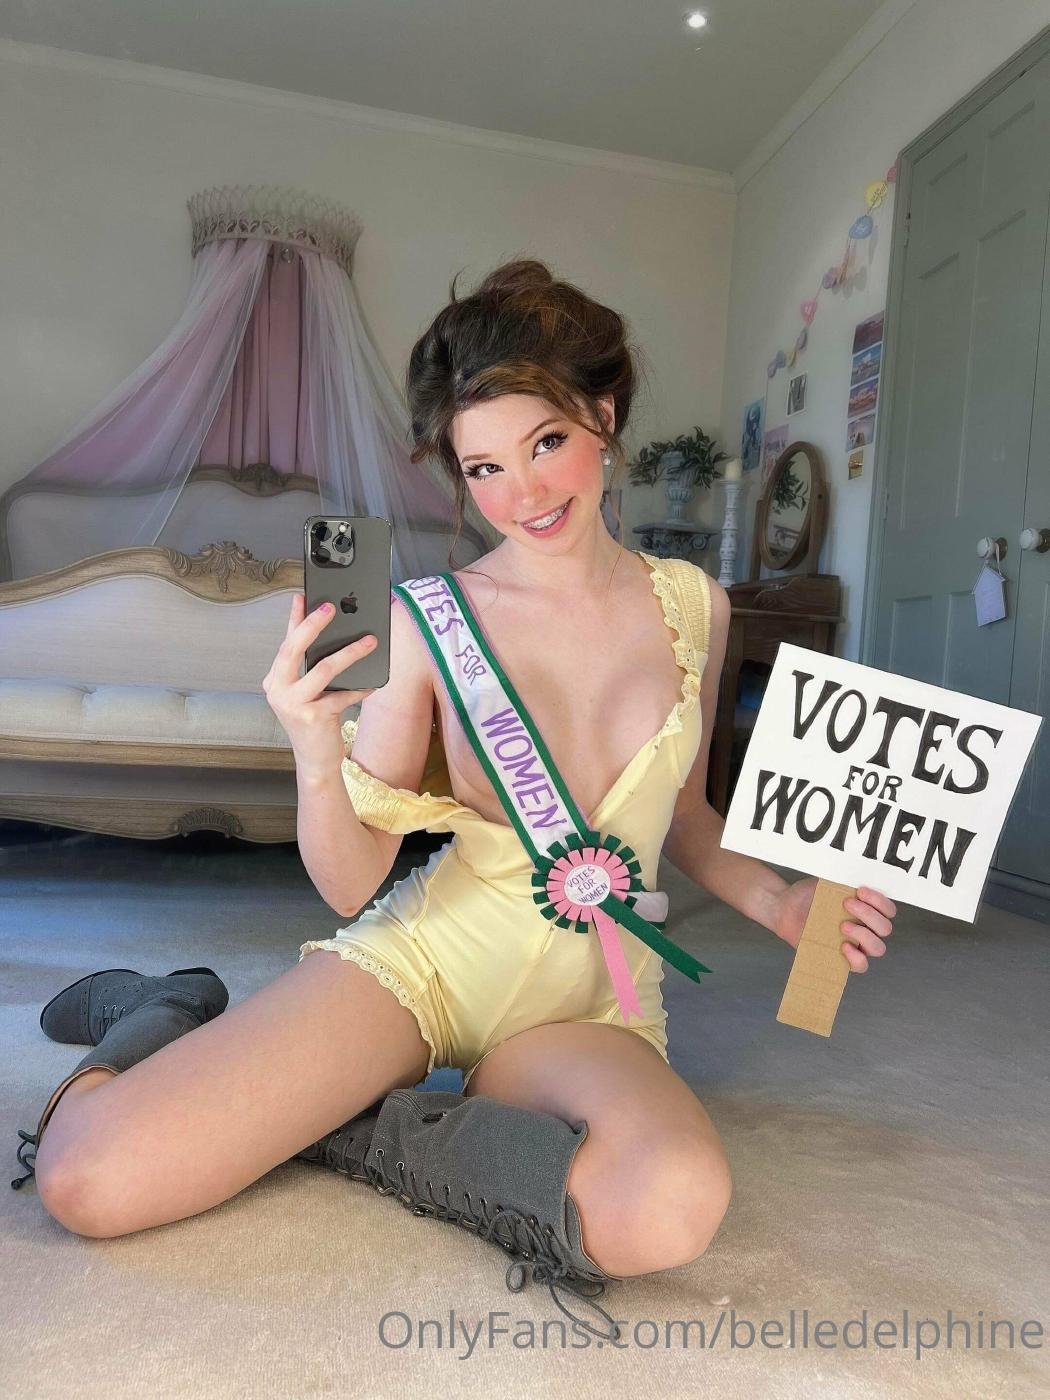 Watch Latest Belle Delphine Votes For Women Onlyfans Set Premium – LeakedVideo.org – Free Download Leaked Sextape, XXX, Porn, Sex Videos, Nude Leaks